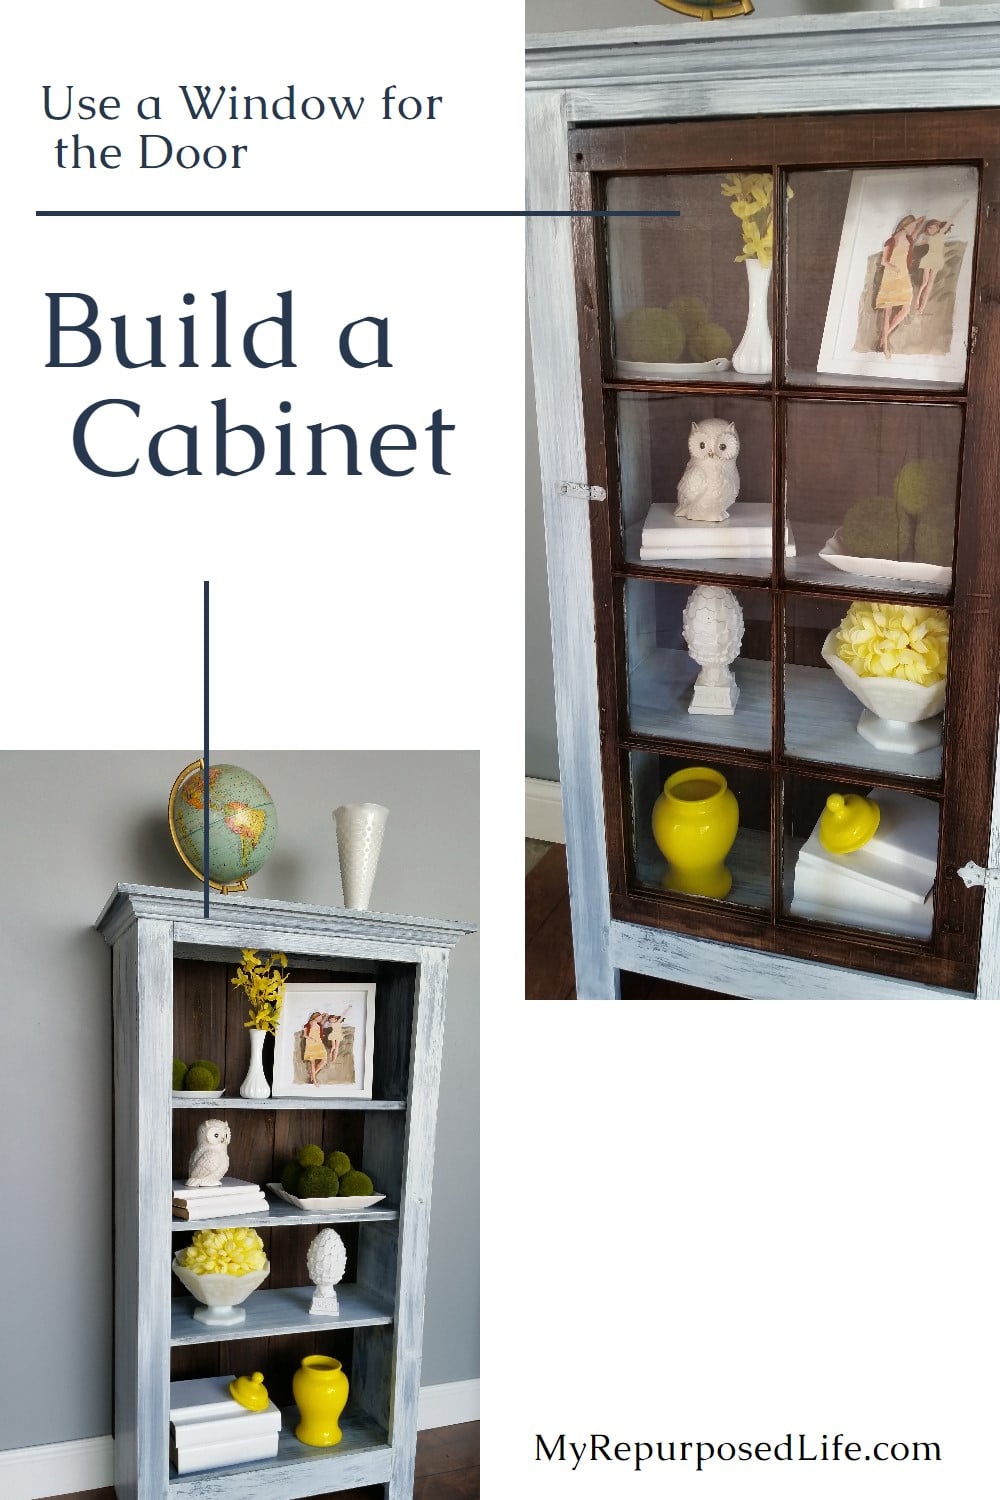 A reclaimed window and other scrap pieces of wood are combined to make a tall window cabinet for displaying items in your home decor. Step by step directions with lots of tips! #MyRepurposedLife #repurposed #window #tall #floor #cabinet #project #homedecor via @repurposedlife